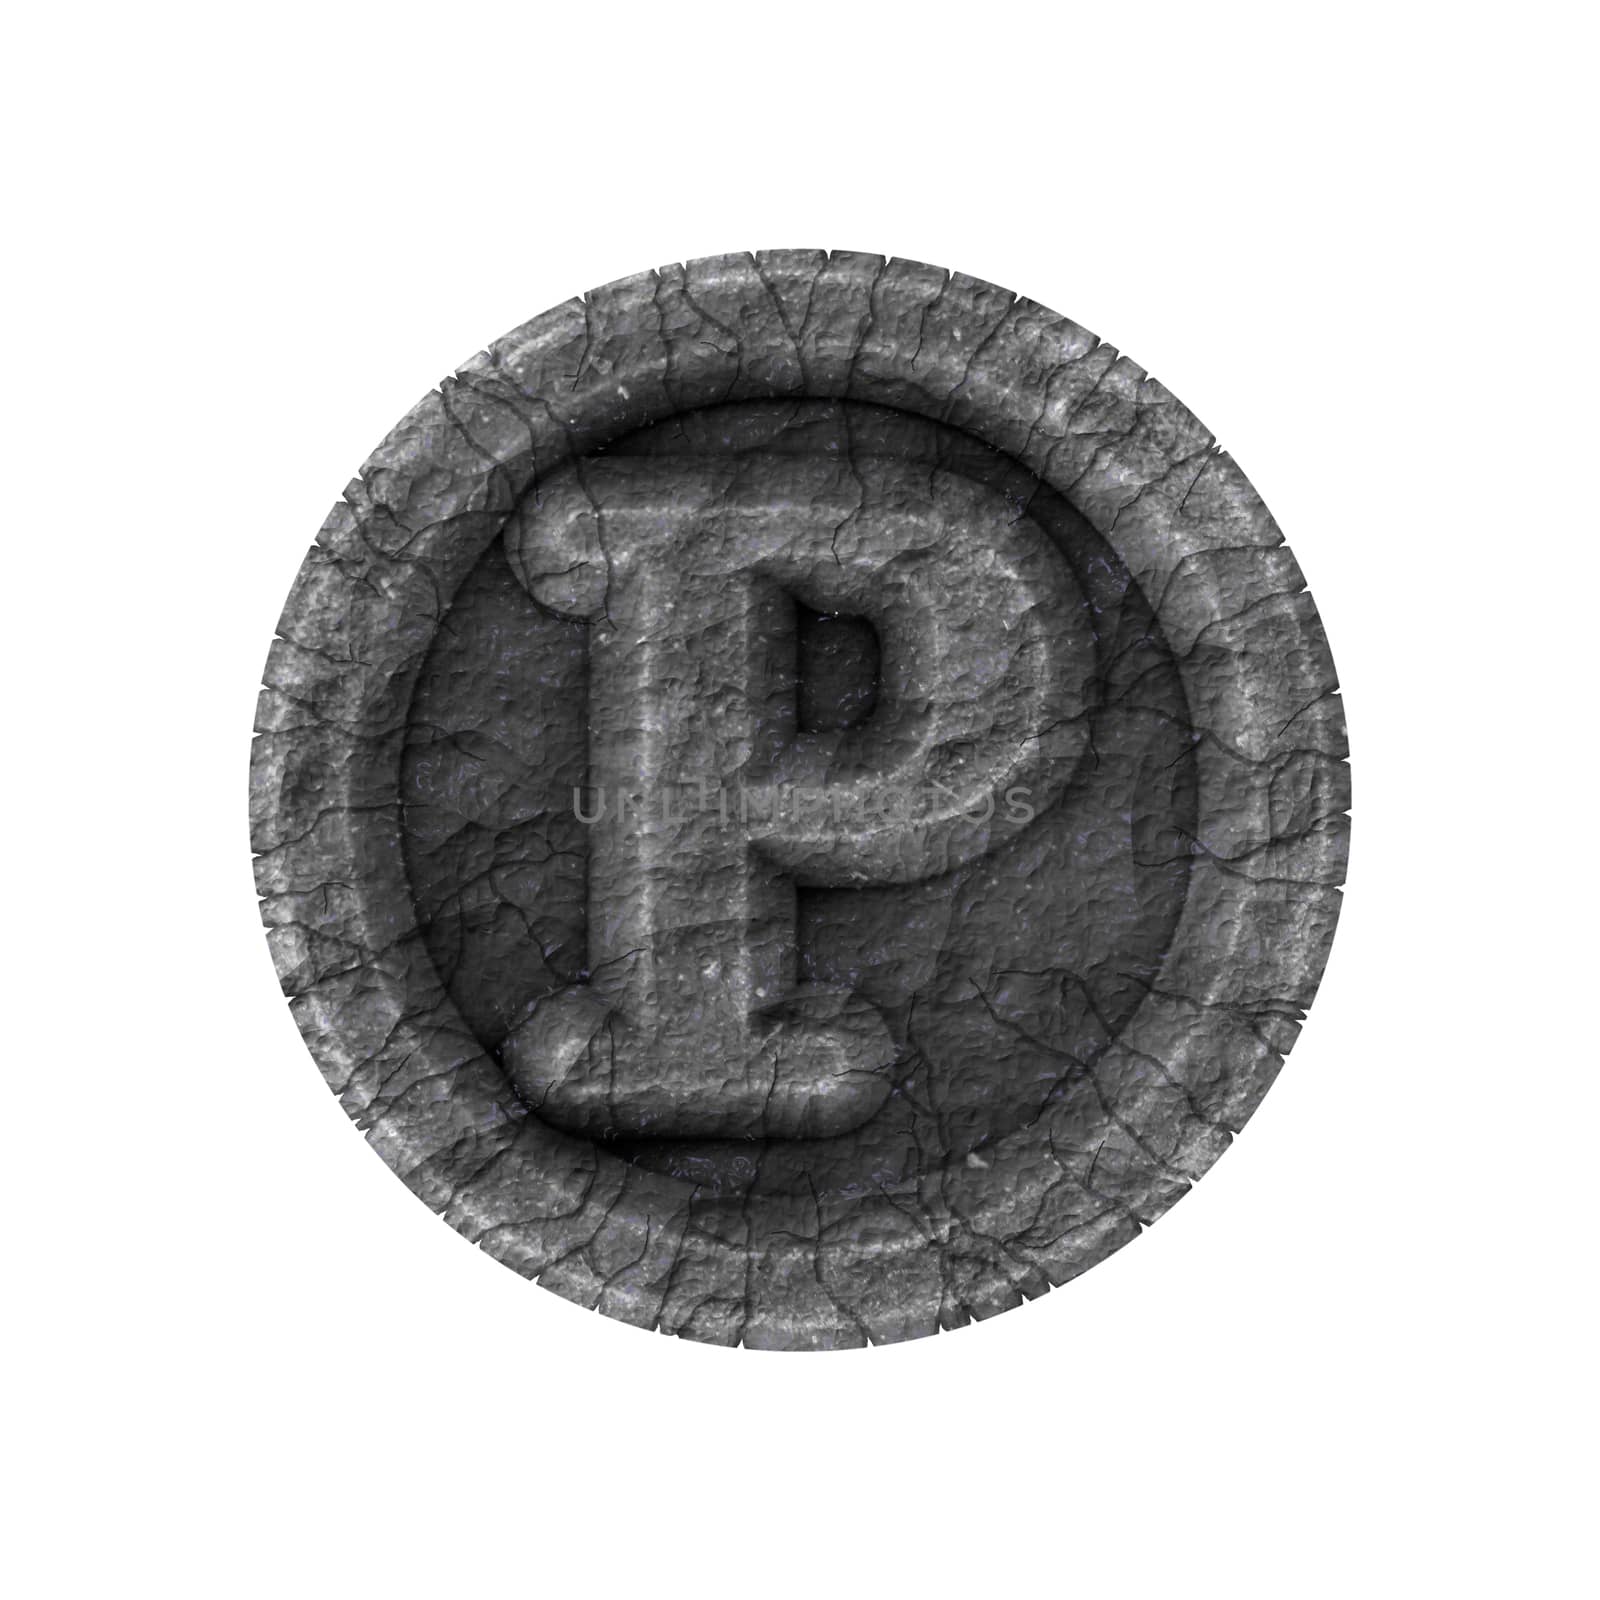 grunge font - letter P by Mibuch